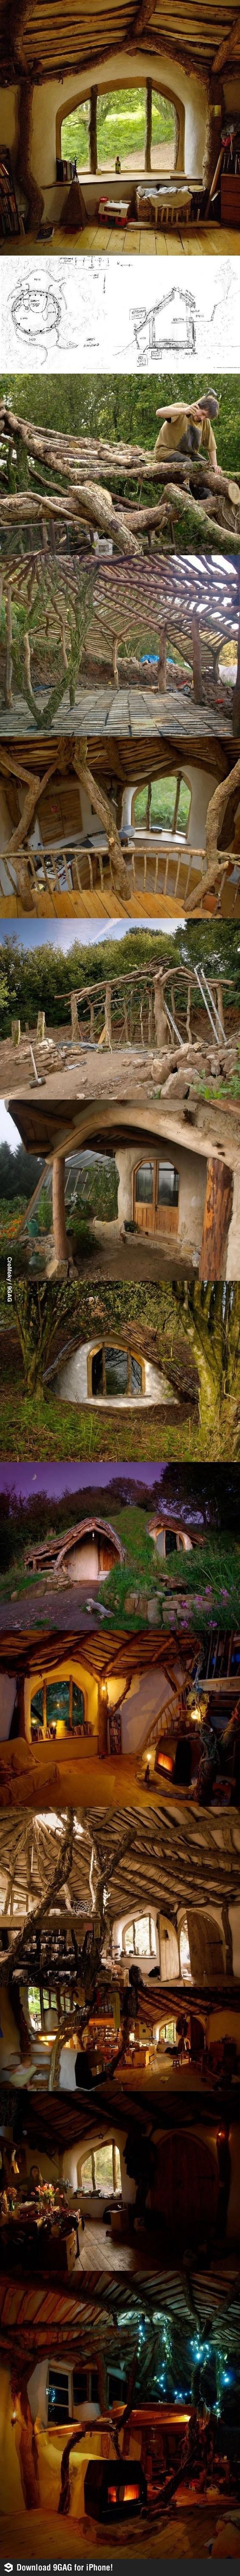 How to build a HOBBIT house – cool!